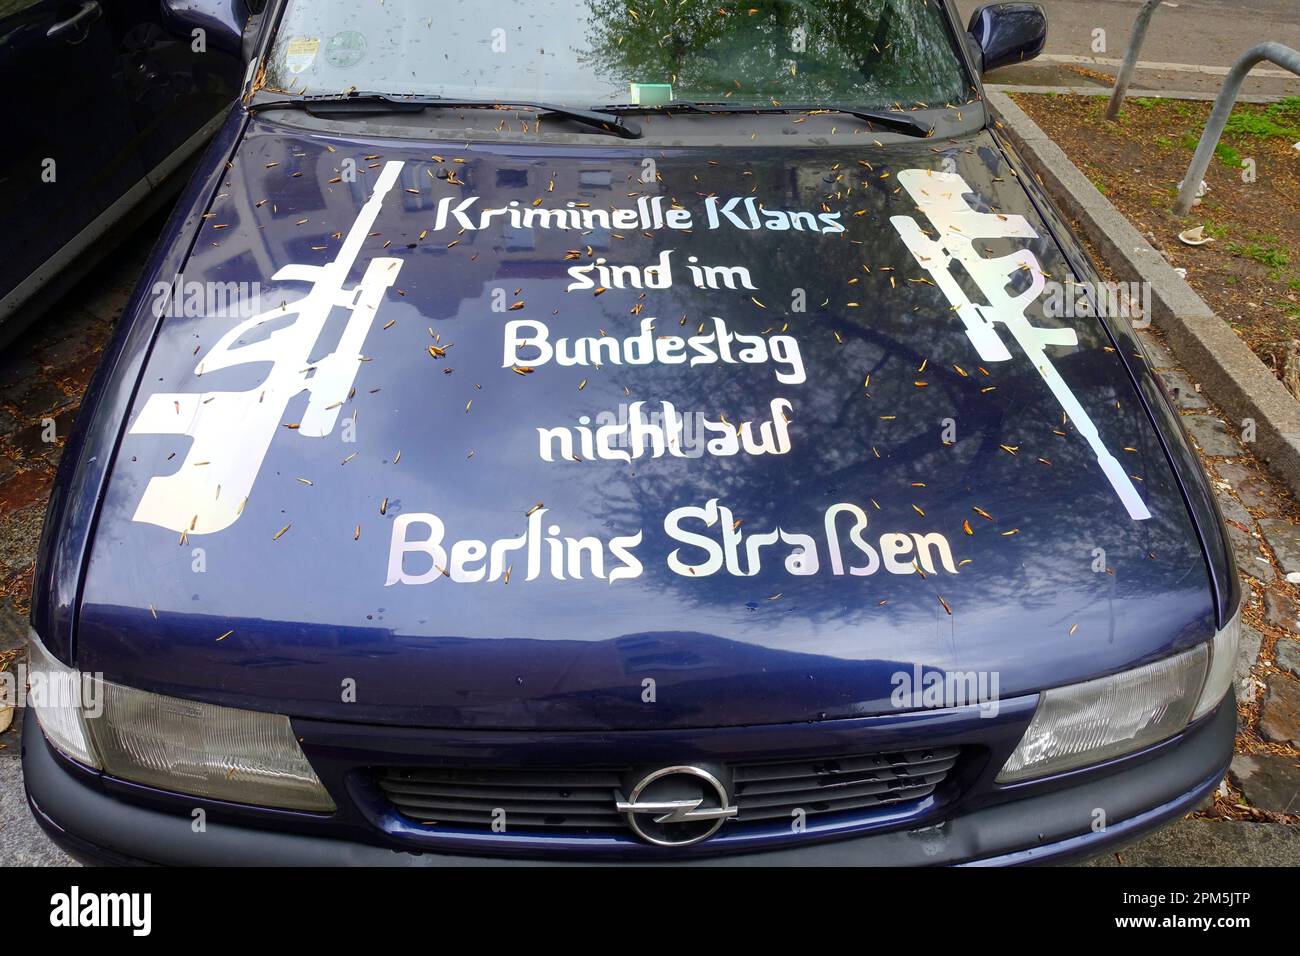 Criminal clans are in the Bundestag and not on the streets of Berlin, car in Berlin, Germany Stock Photo